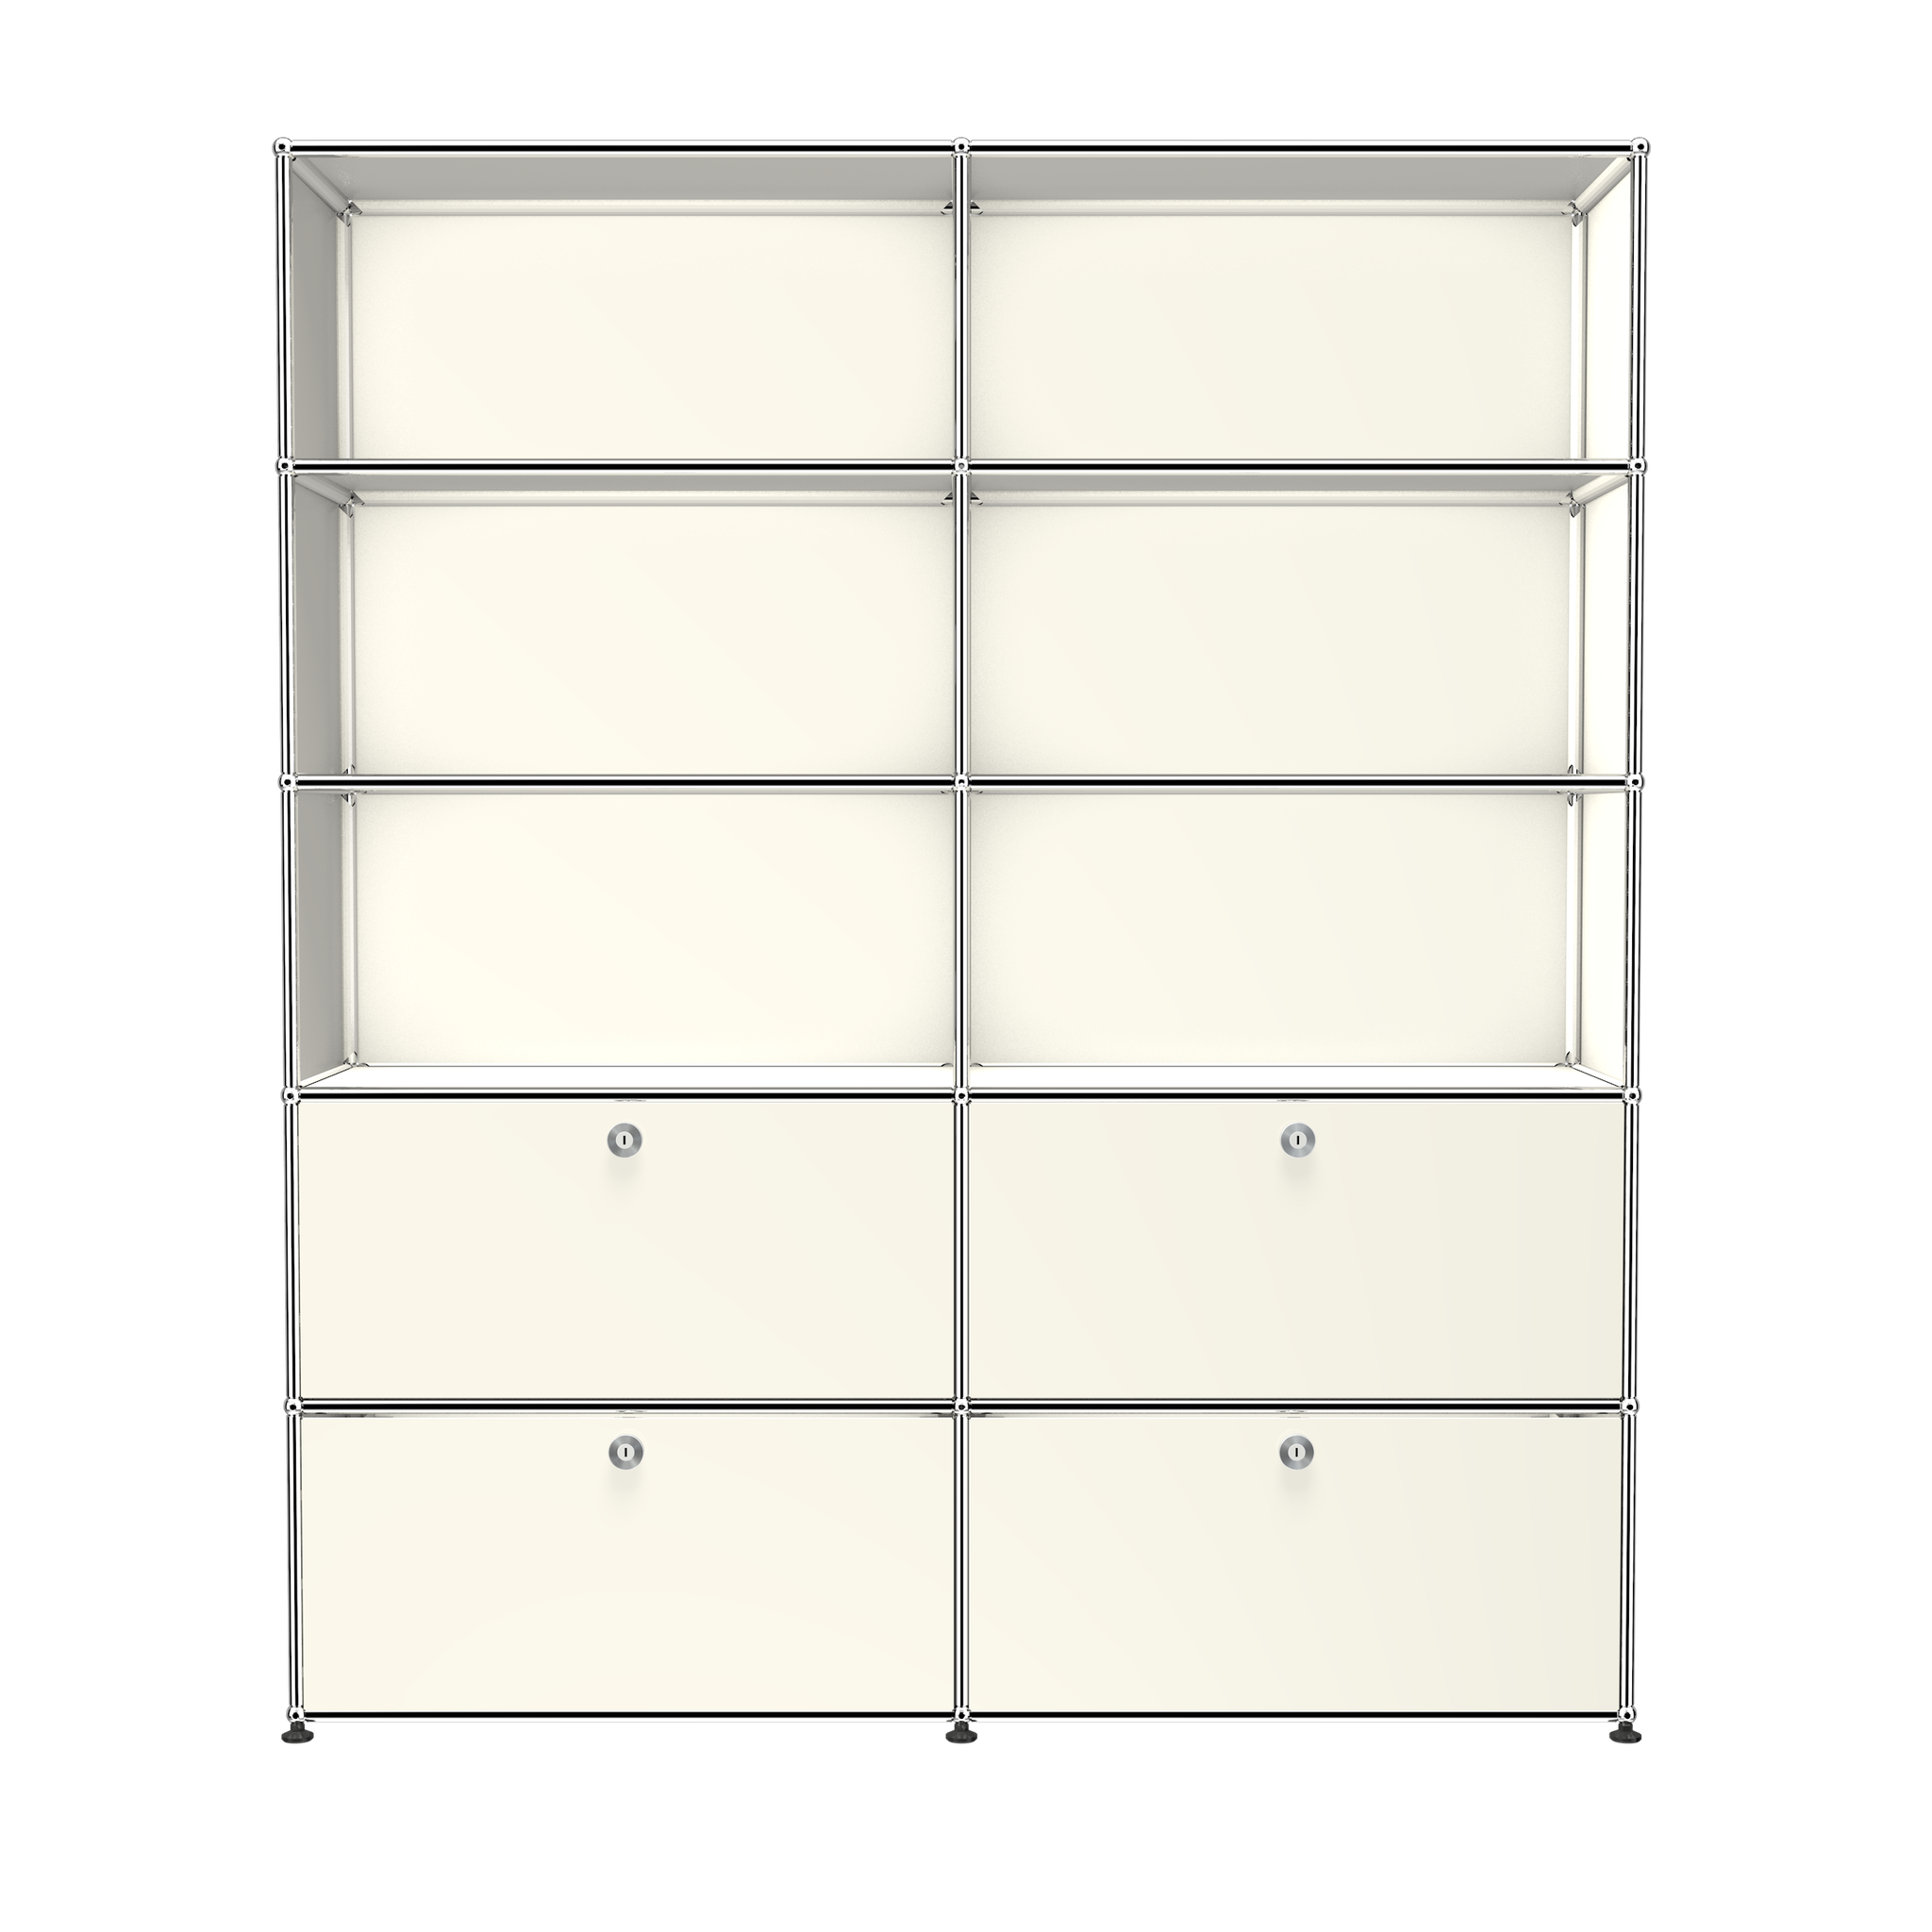 USM Haller Large Contemporary Shelving with Storage (R2) in Pure White